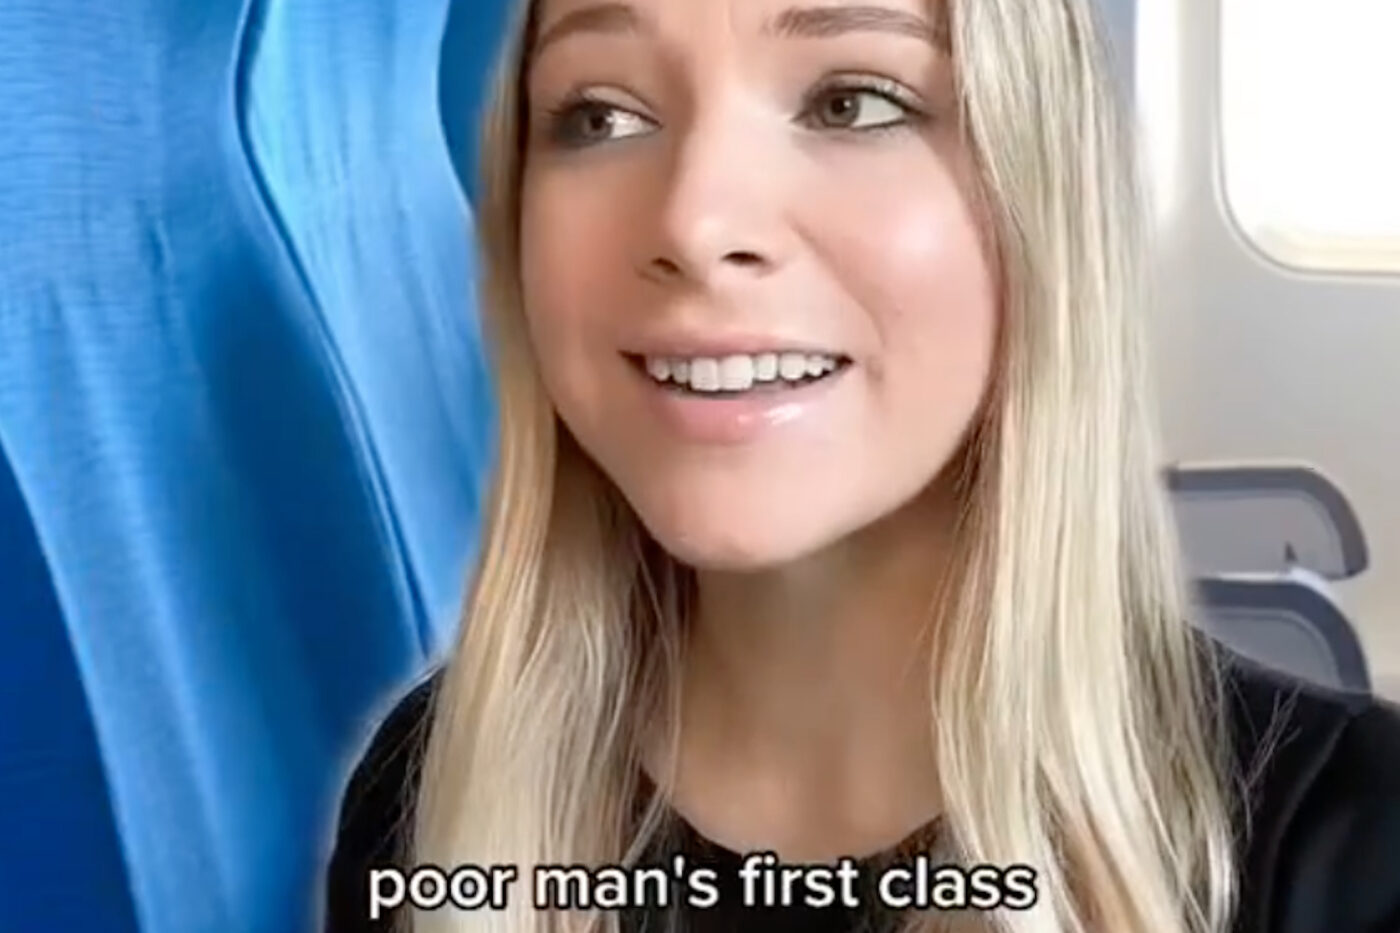 Beware: Viral ‘Poor Man’s First Class’ Travel Hack Is Literally Just Fraud